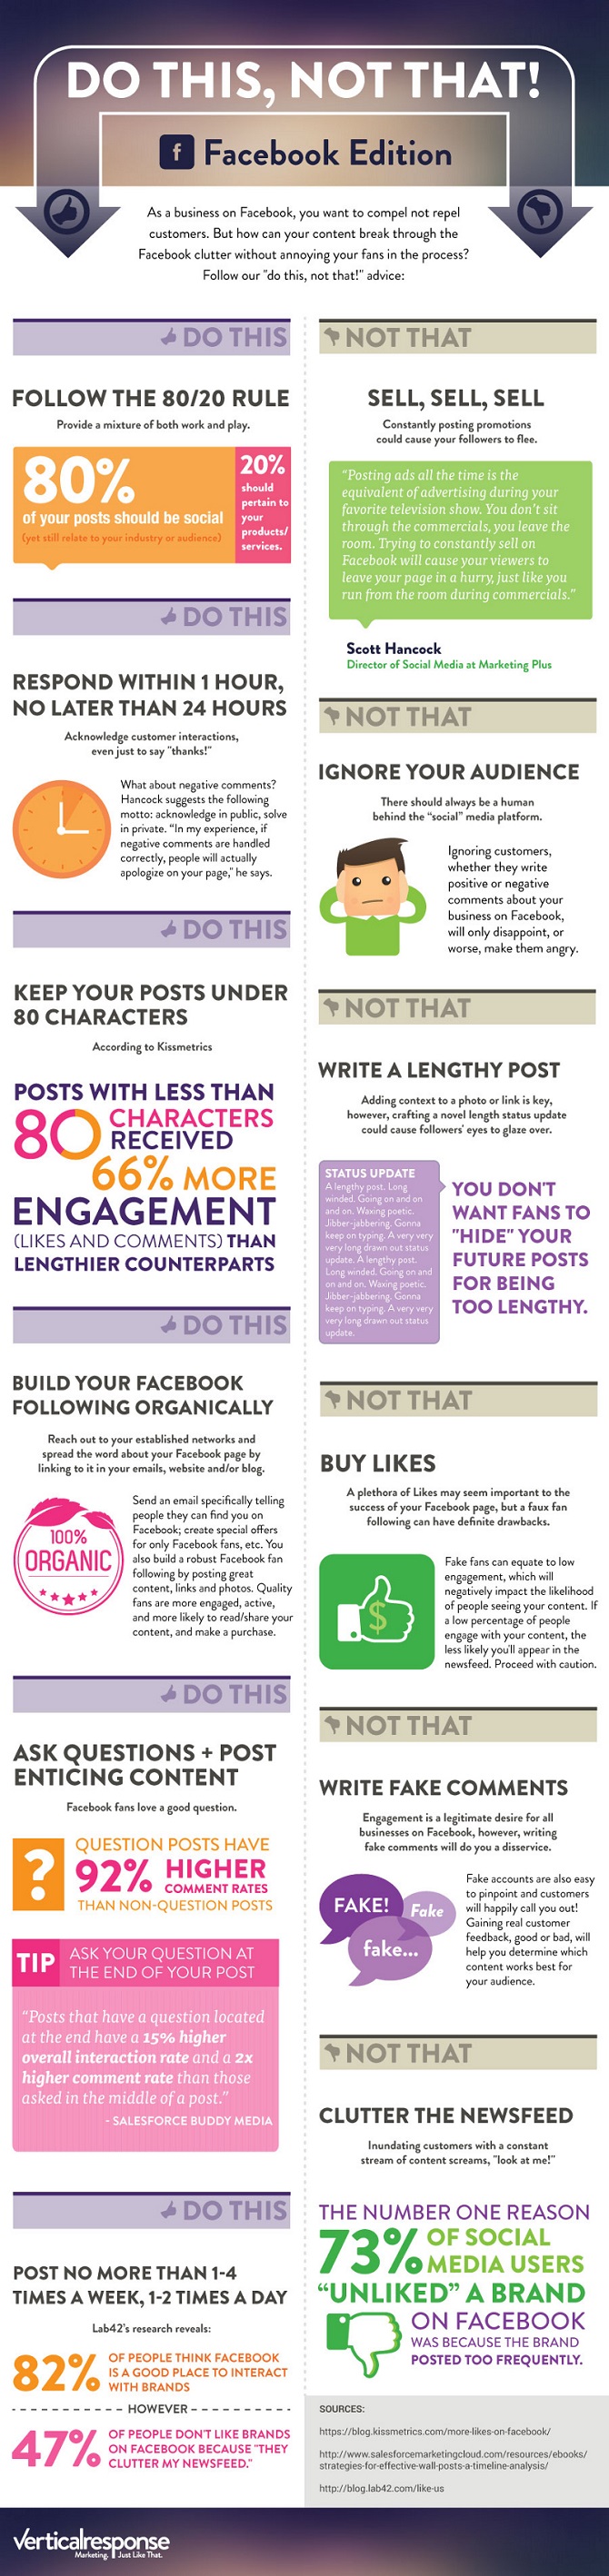 12 Dos and Don’ts of Facebook Page Management